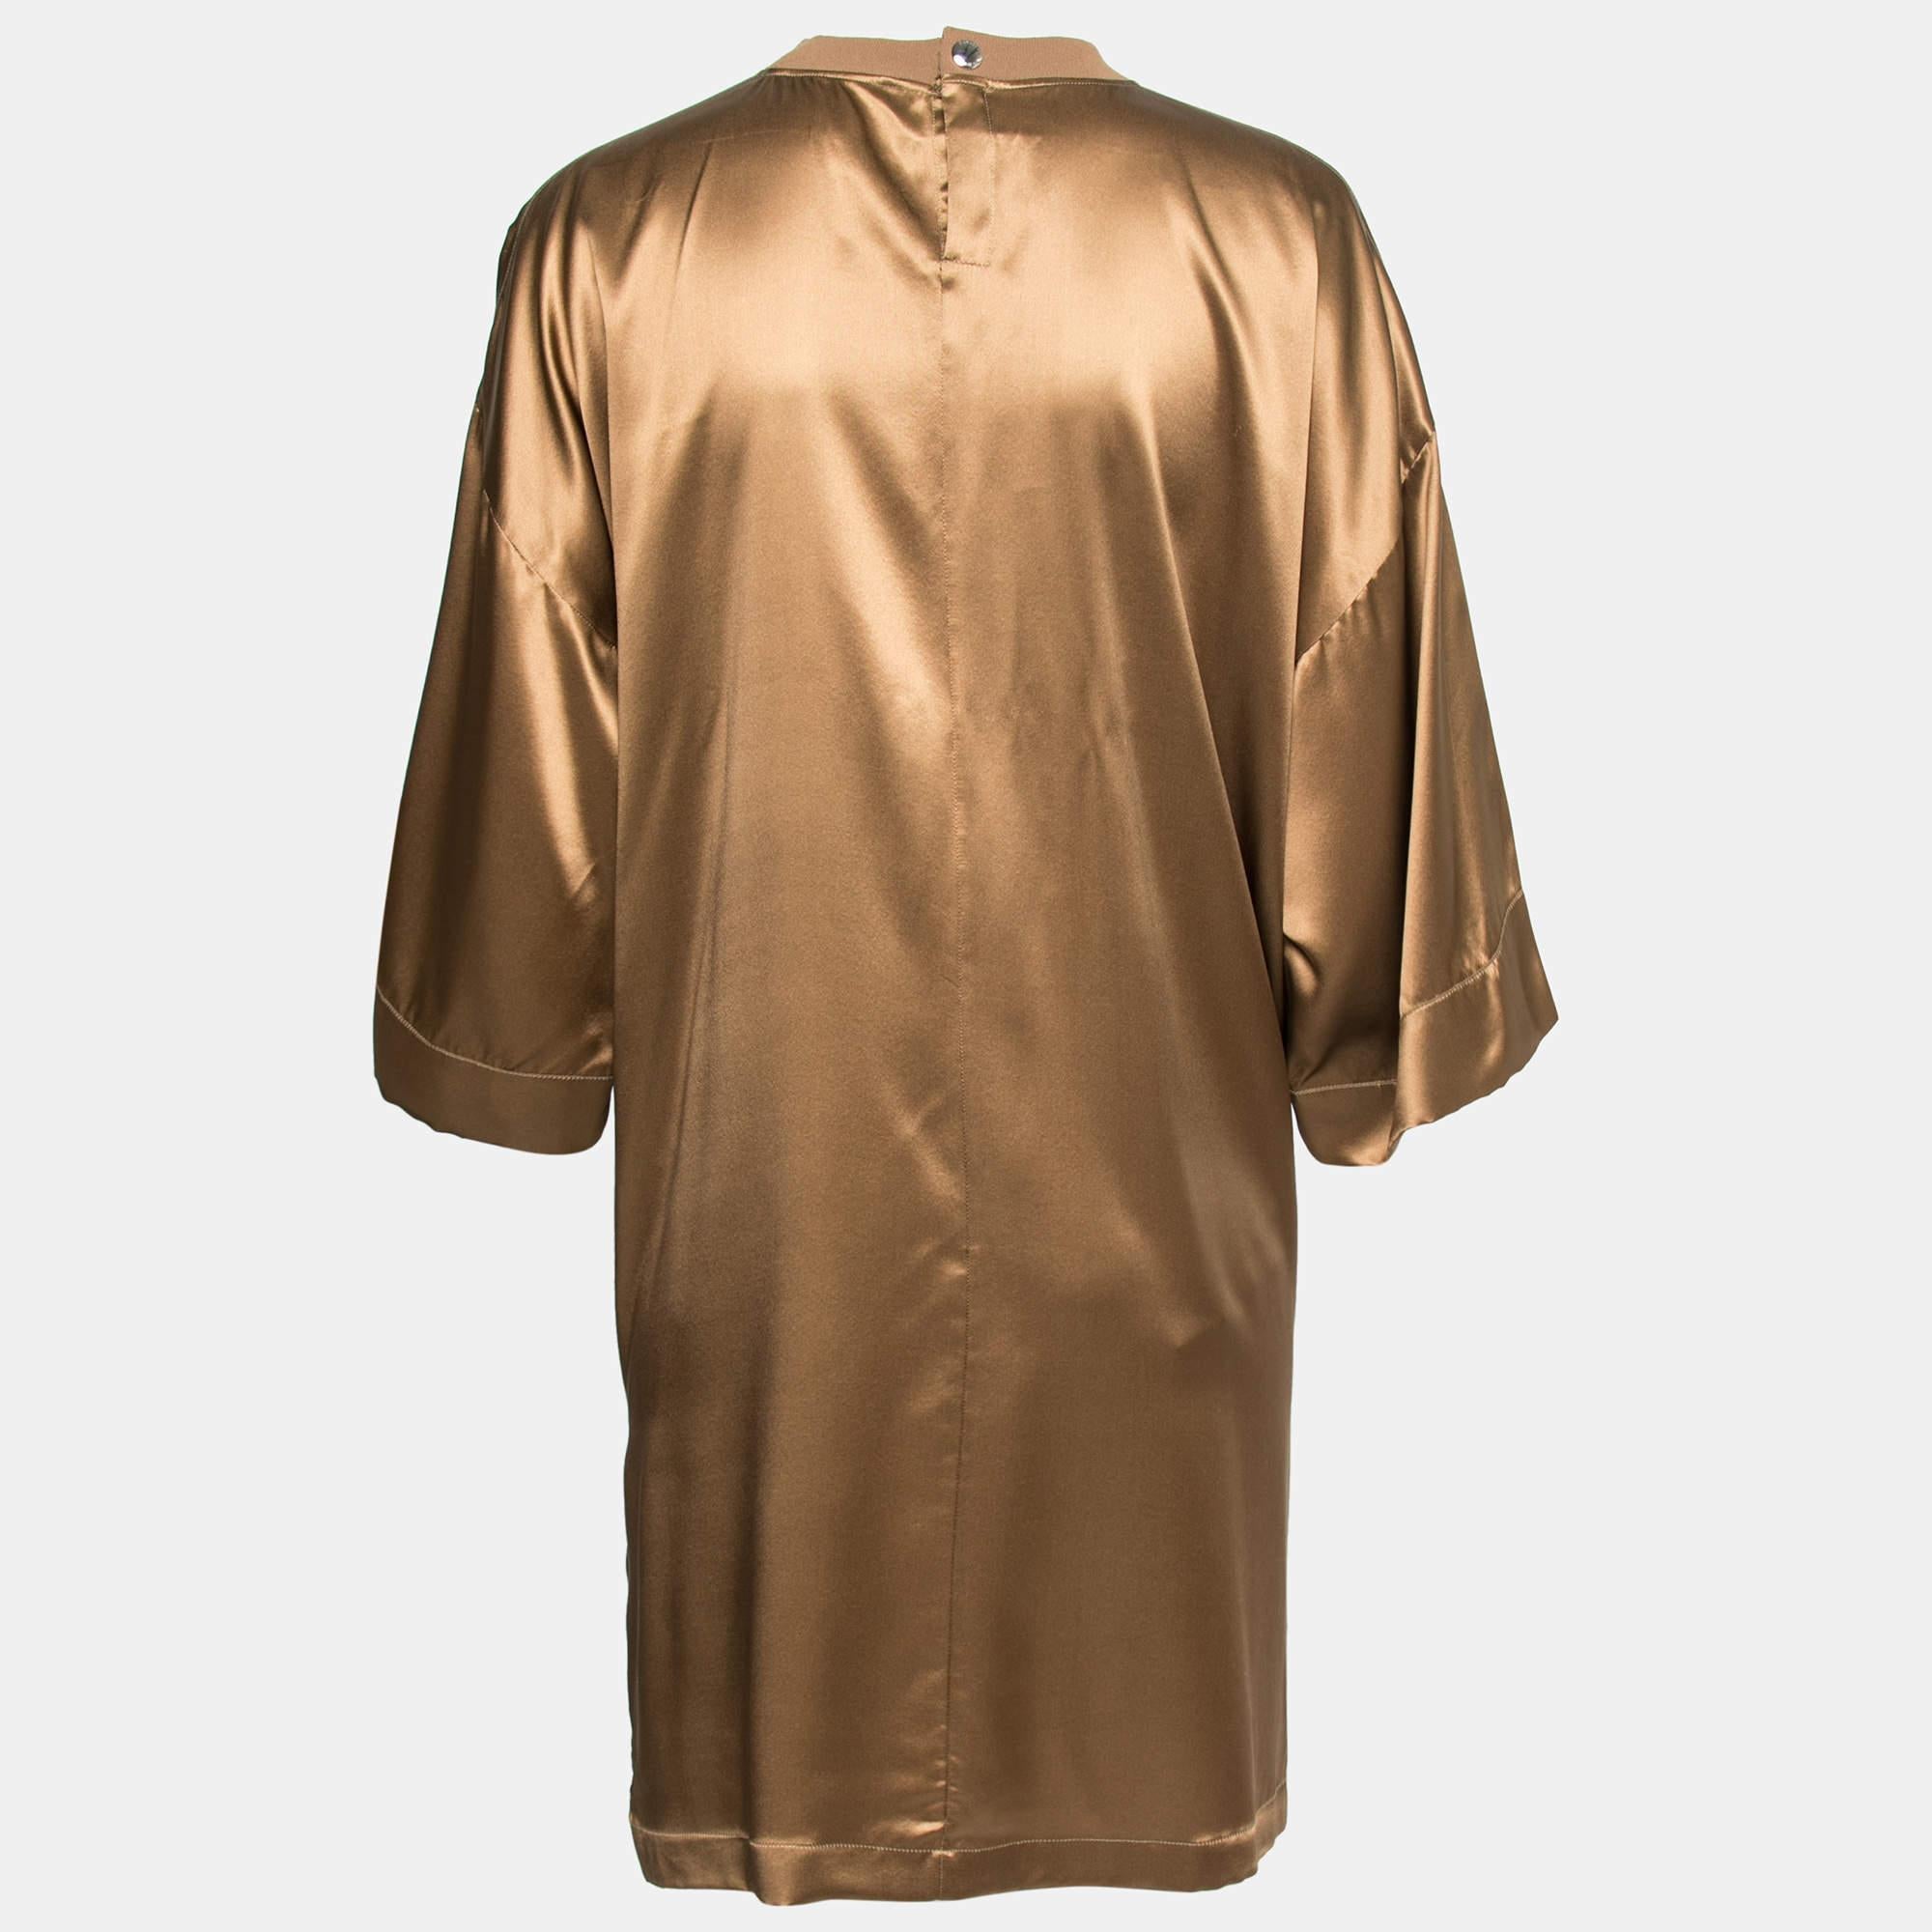 The smooth finished feel of this satin silk-tailored silhouette from Givenchy will lend a posh appeal to your attire and keep you comfortable. This oversized tunic flaunts a brown hue, a crew neck, and short sleeves. It is provided with a buttoned